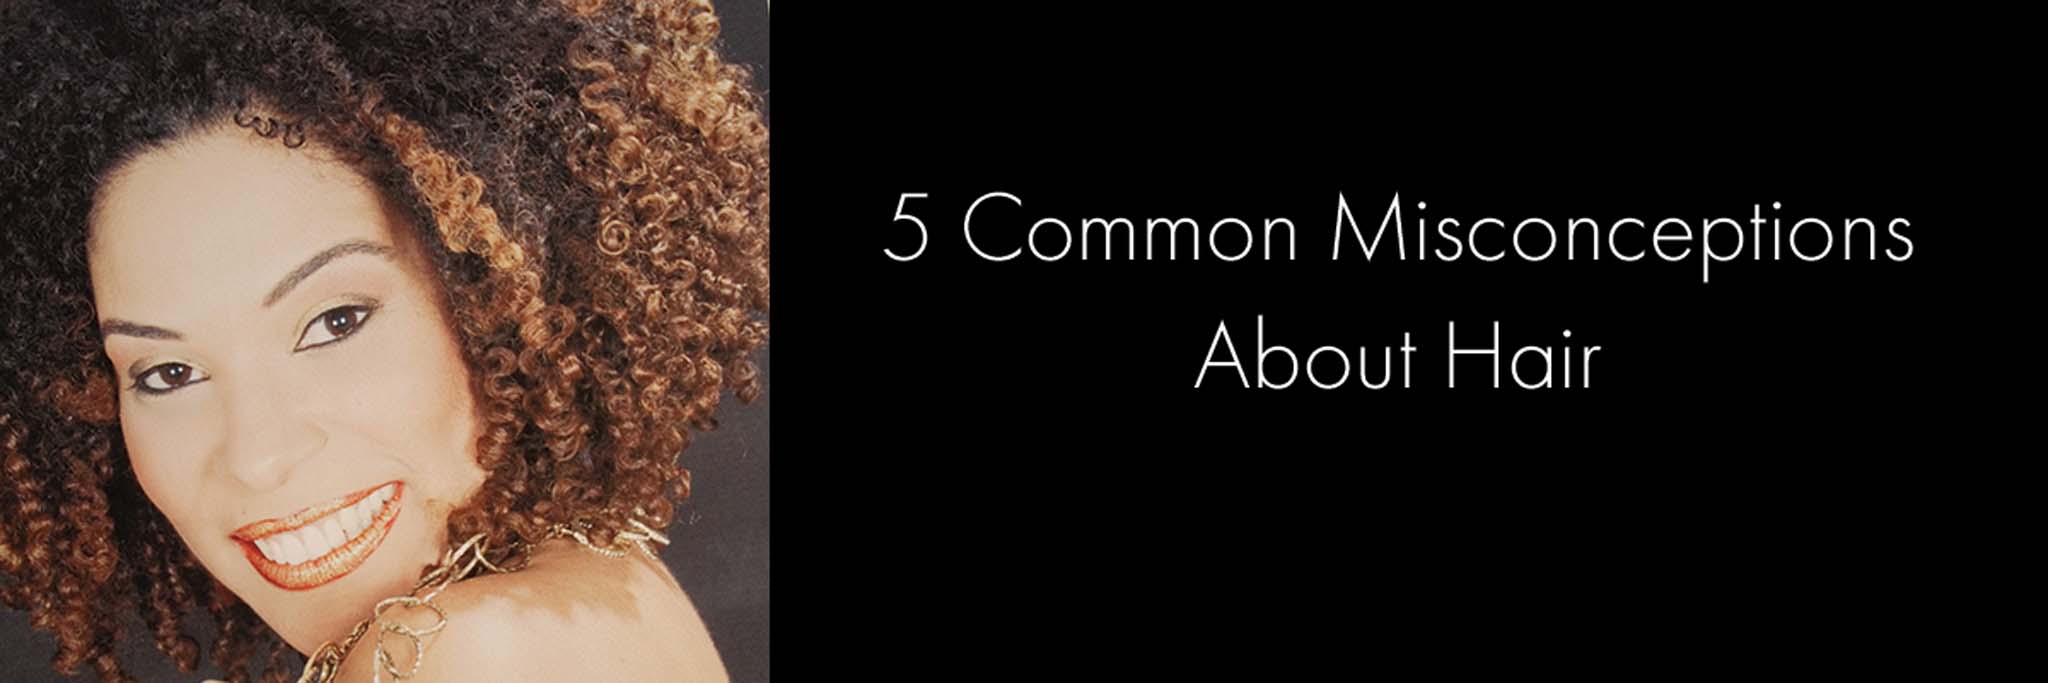 5 misconceptions about hair